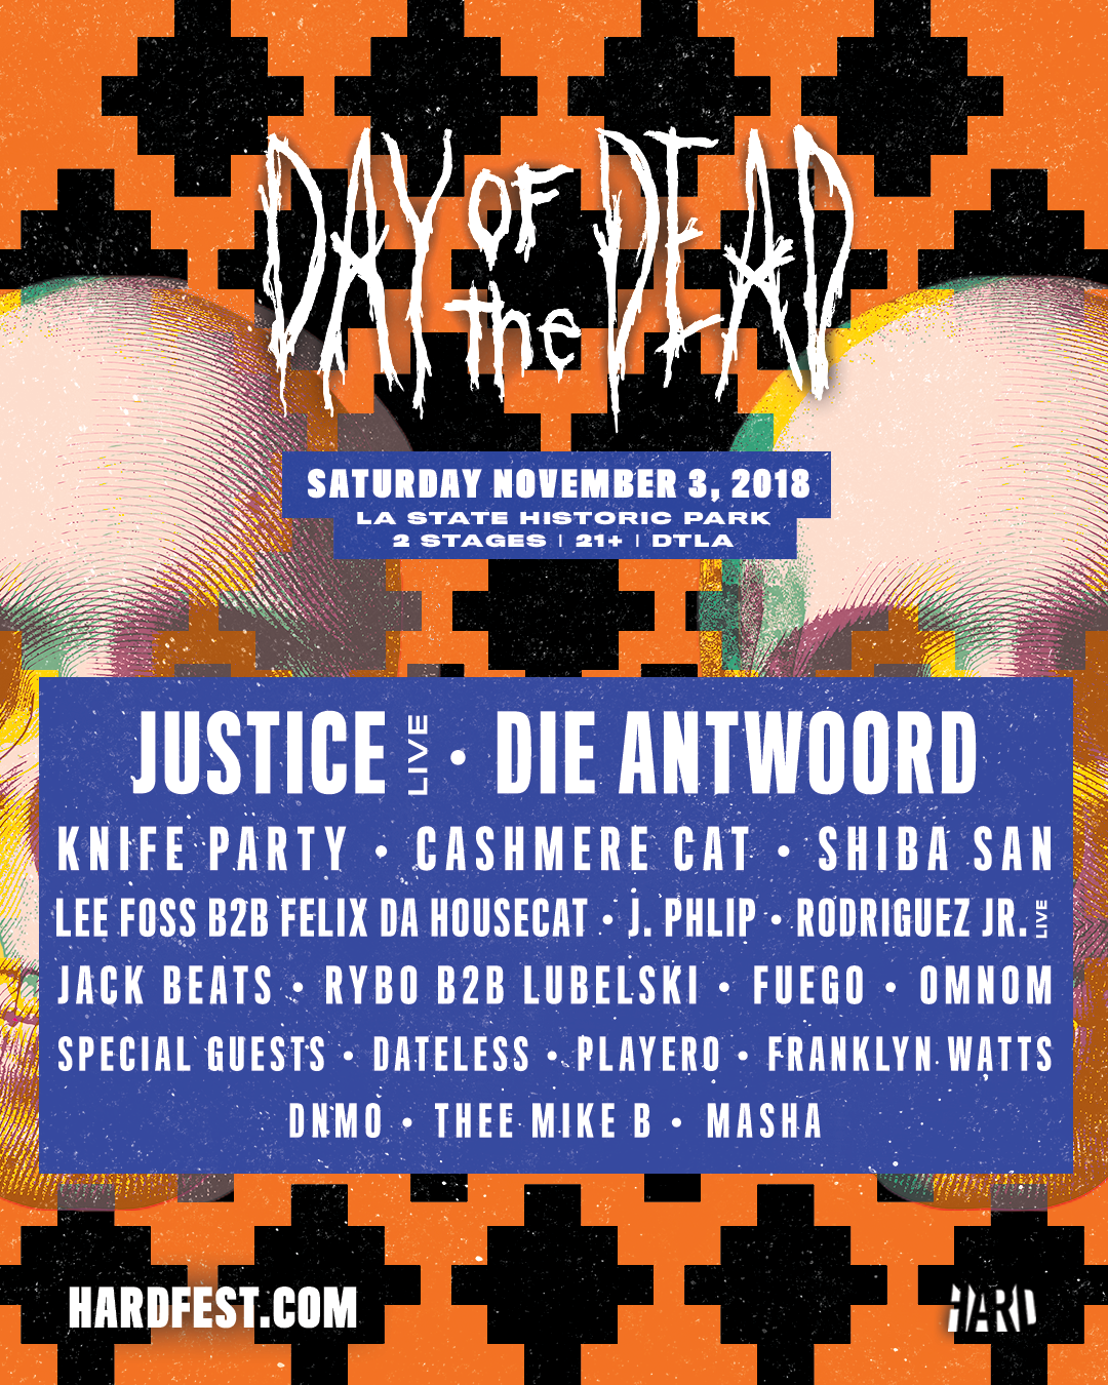 HARD Day of the Dead 2018 Lineup